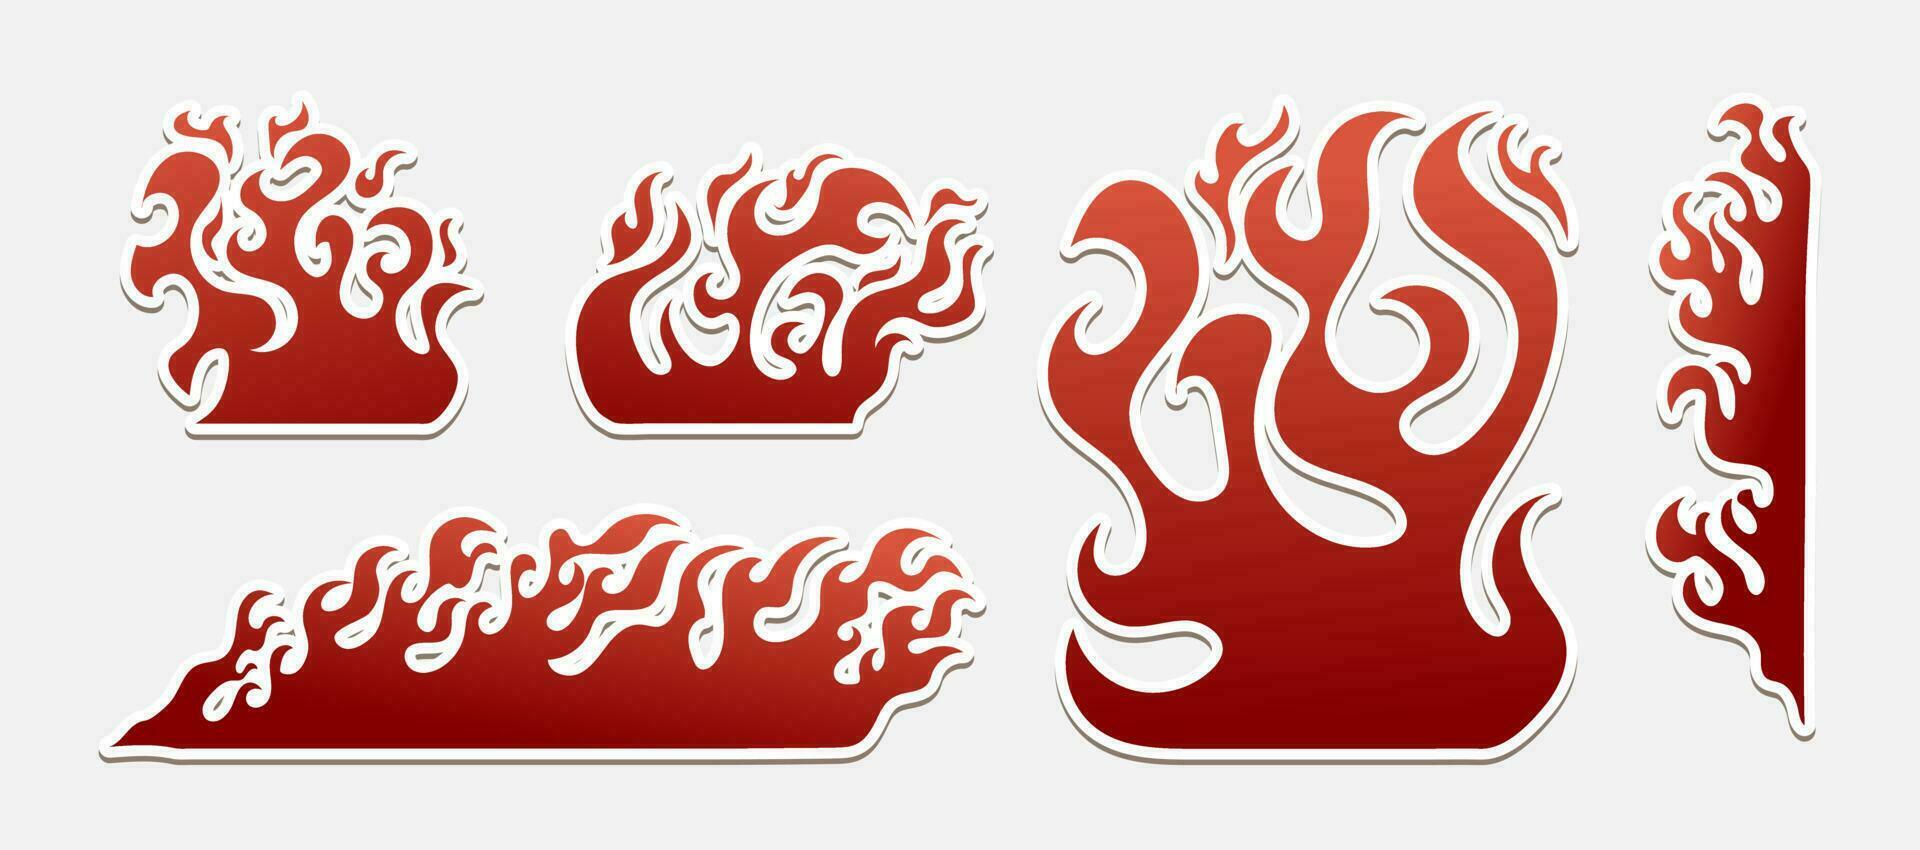 Hand drawn fire illustration on white background for element design. silhouette of flames in set. Sticker vector